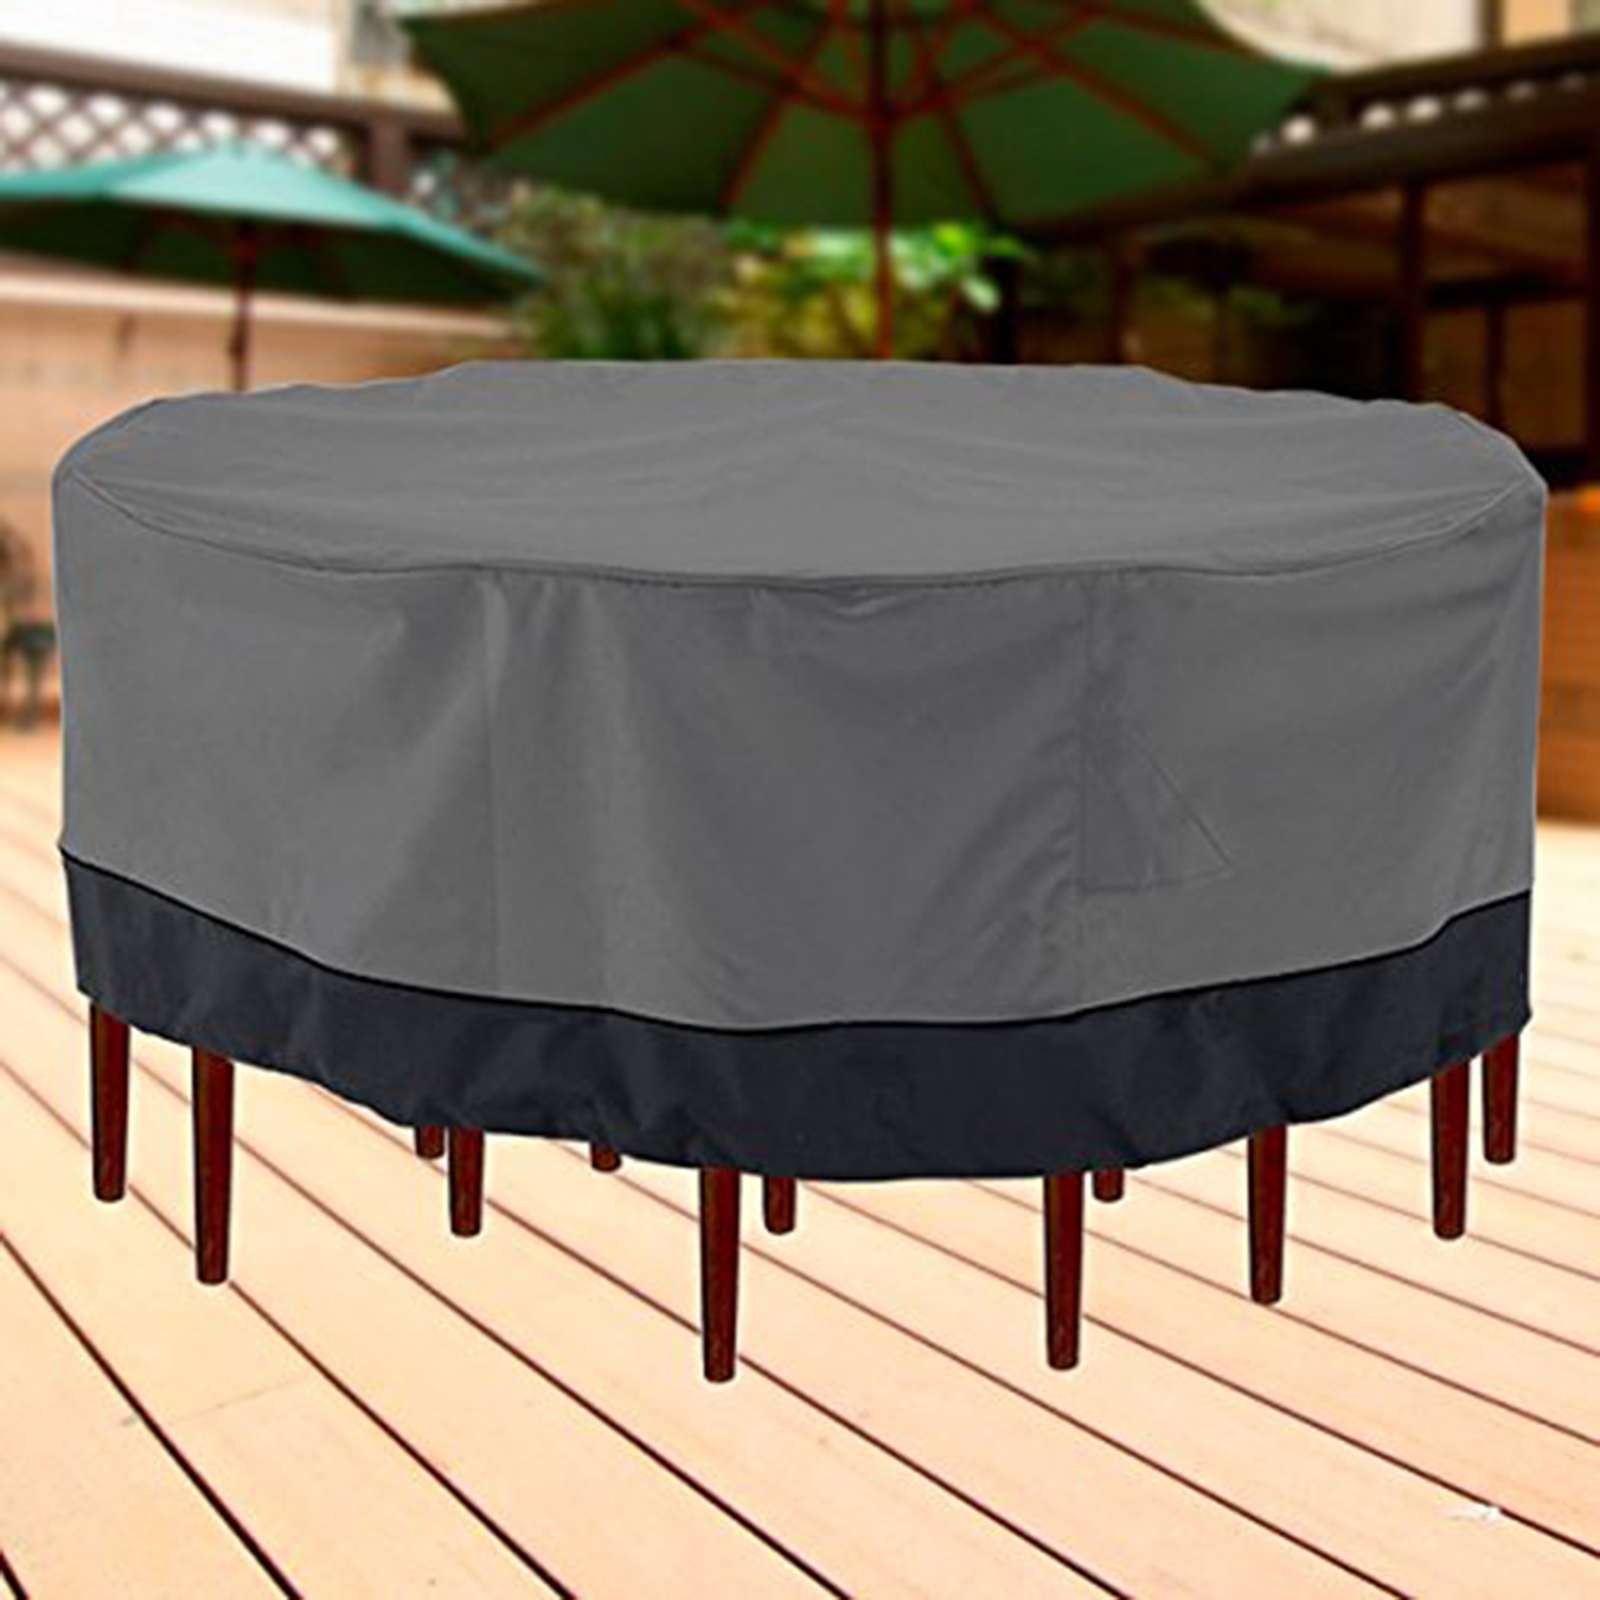 NEH® Outdoor Patio Furniture Table and Chairs Dark Gray ...